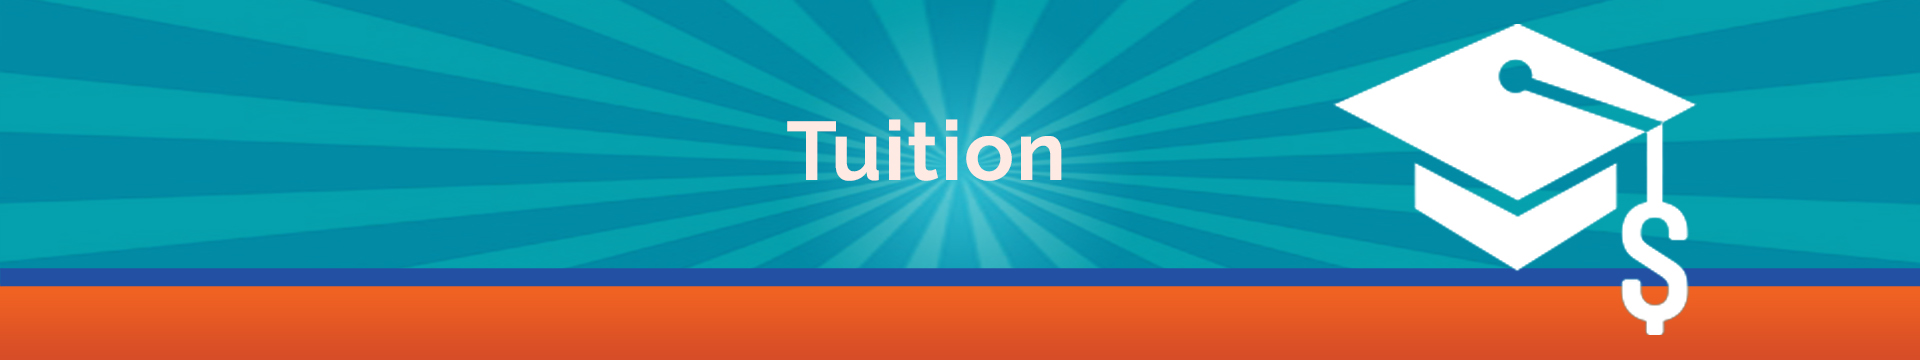 tuition web banner